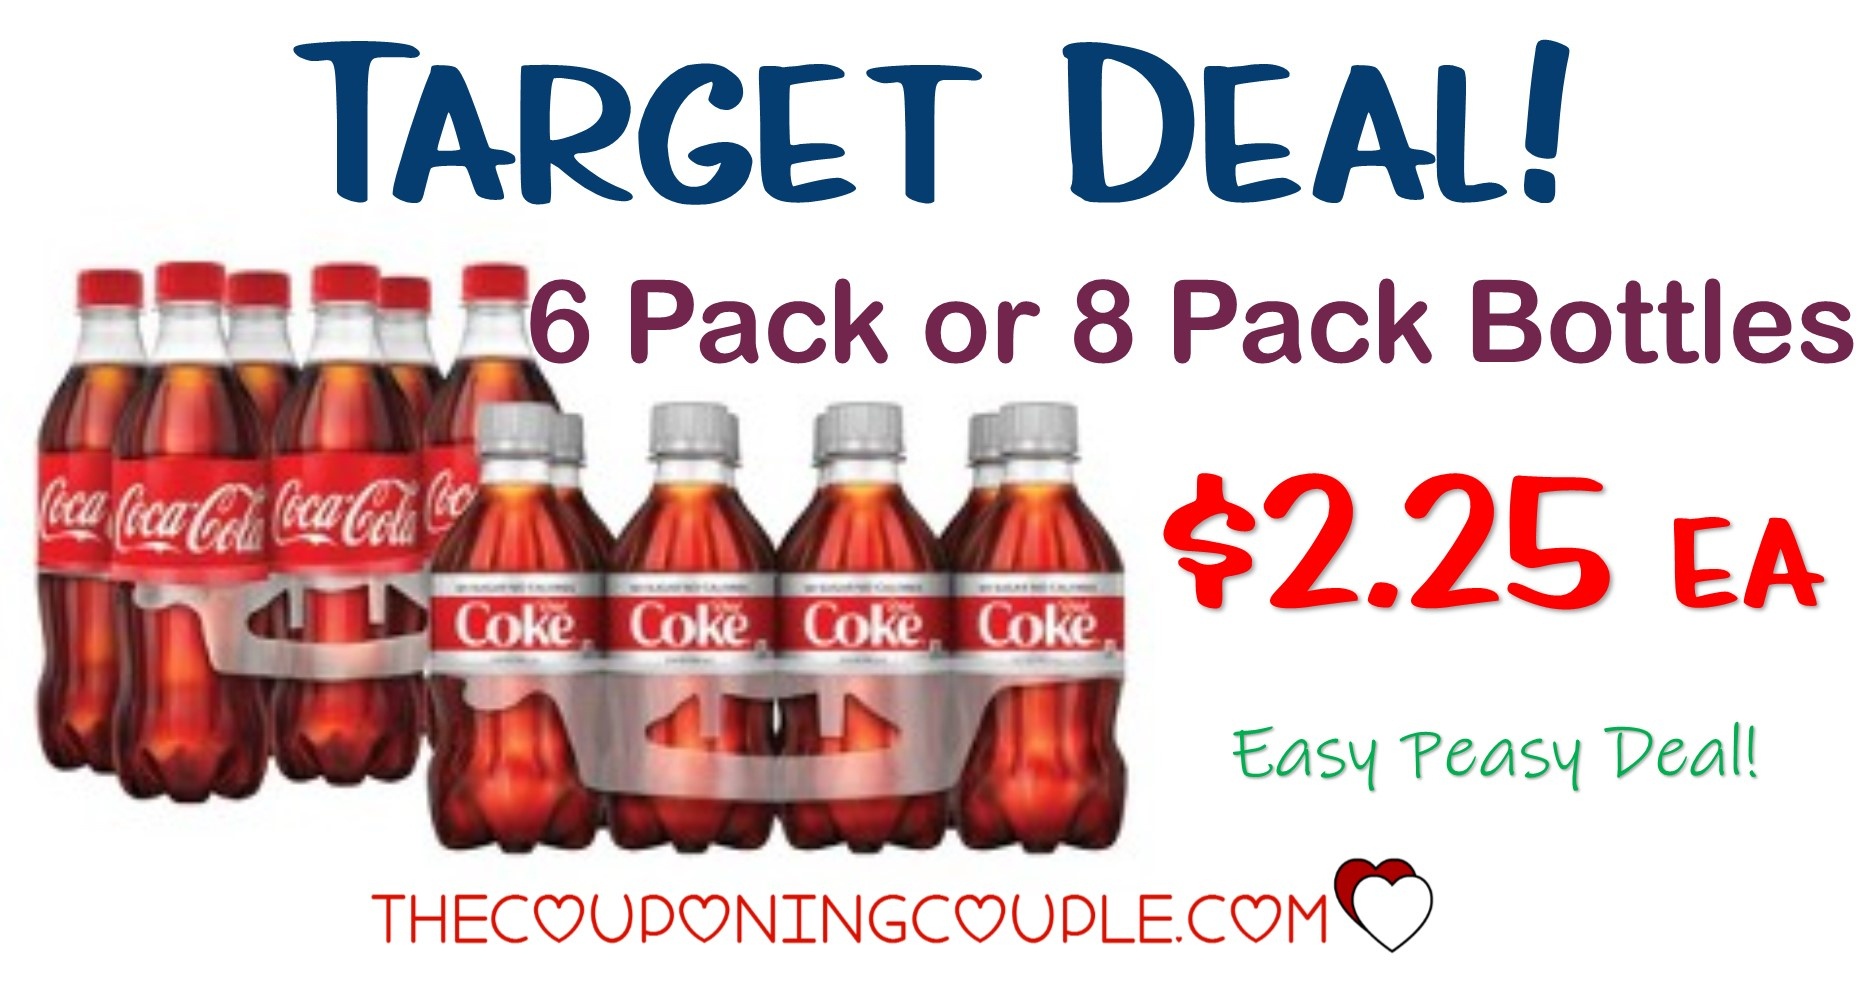 Stock Up Deal On Coca Cola At Target! $2.25 6Pk Or 8Pk Bottles! - Free Printable Coupons For Coca Cola Products